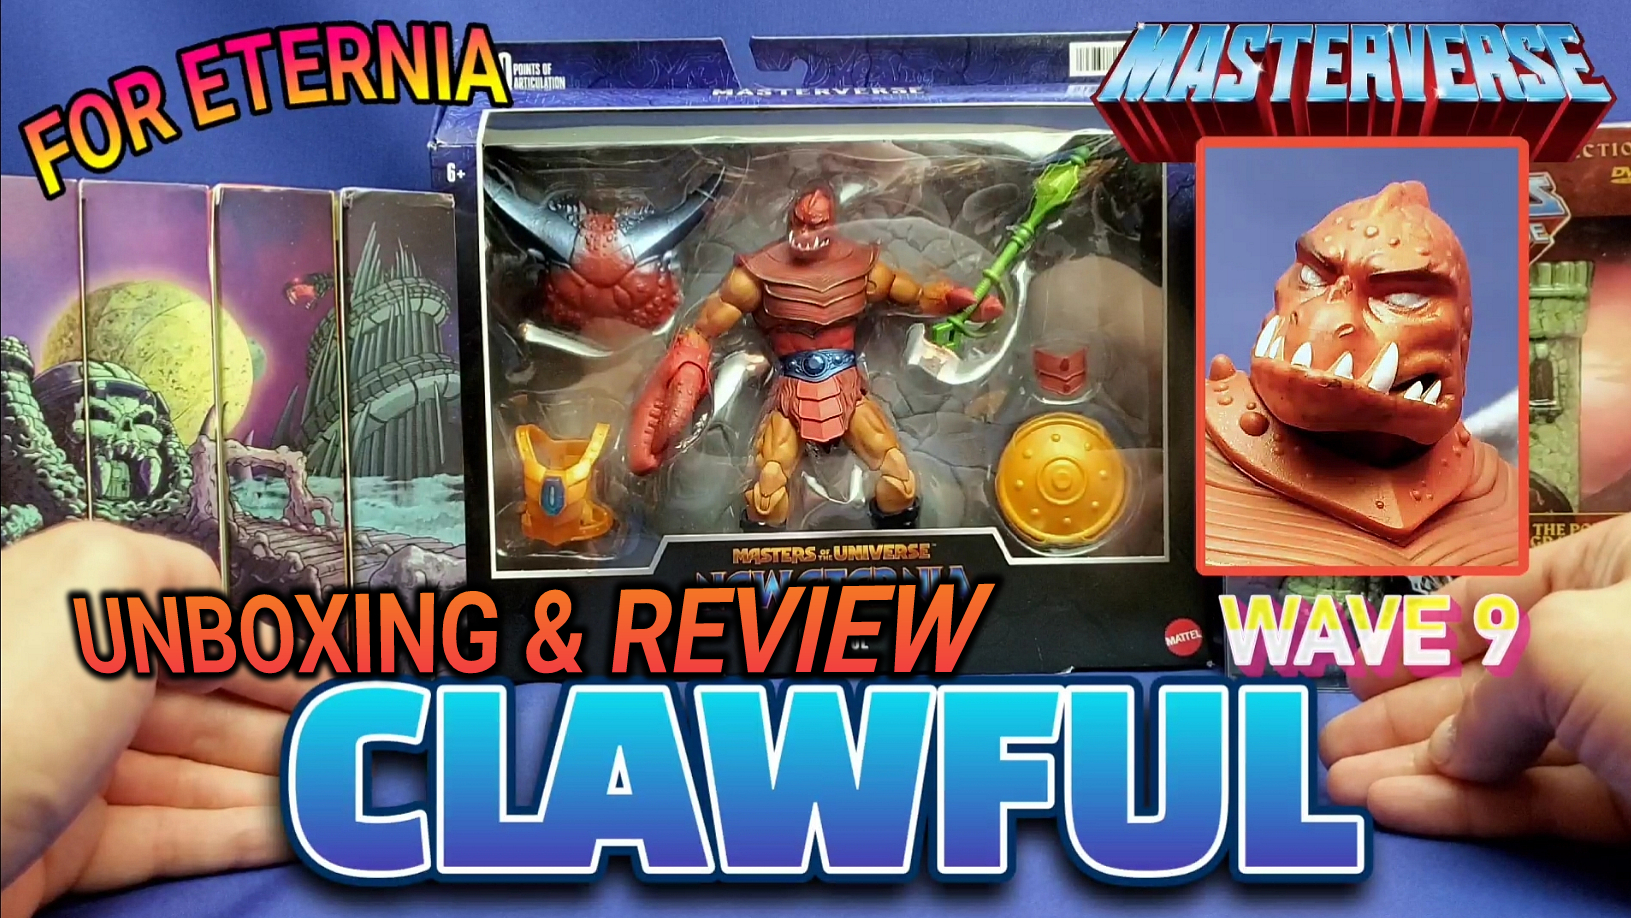 Watch our UNBOXING & REVIEW of the MASTERVERSE Clawful Wave 9 New Eternia Figure